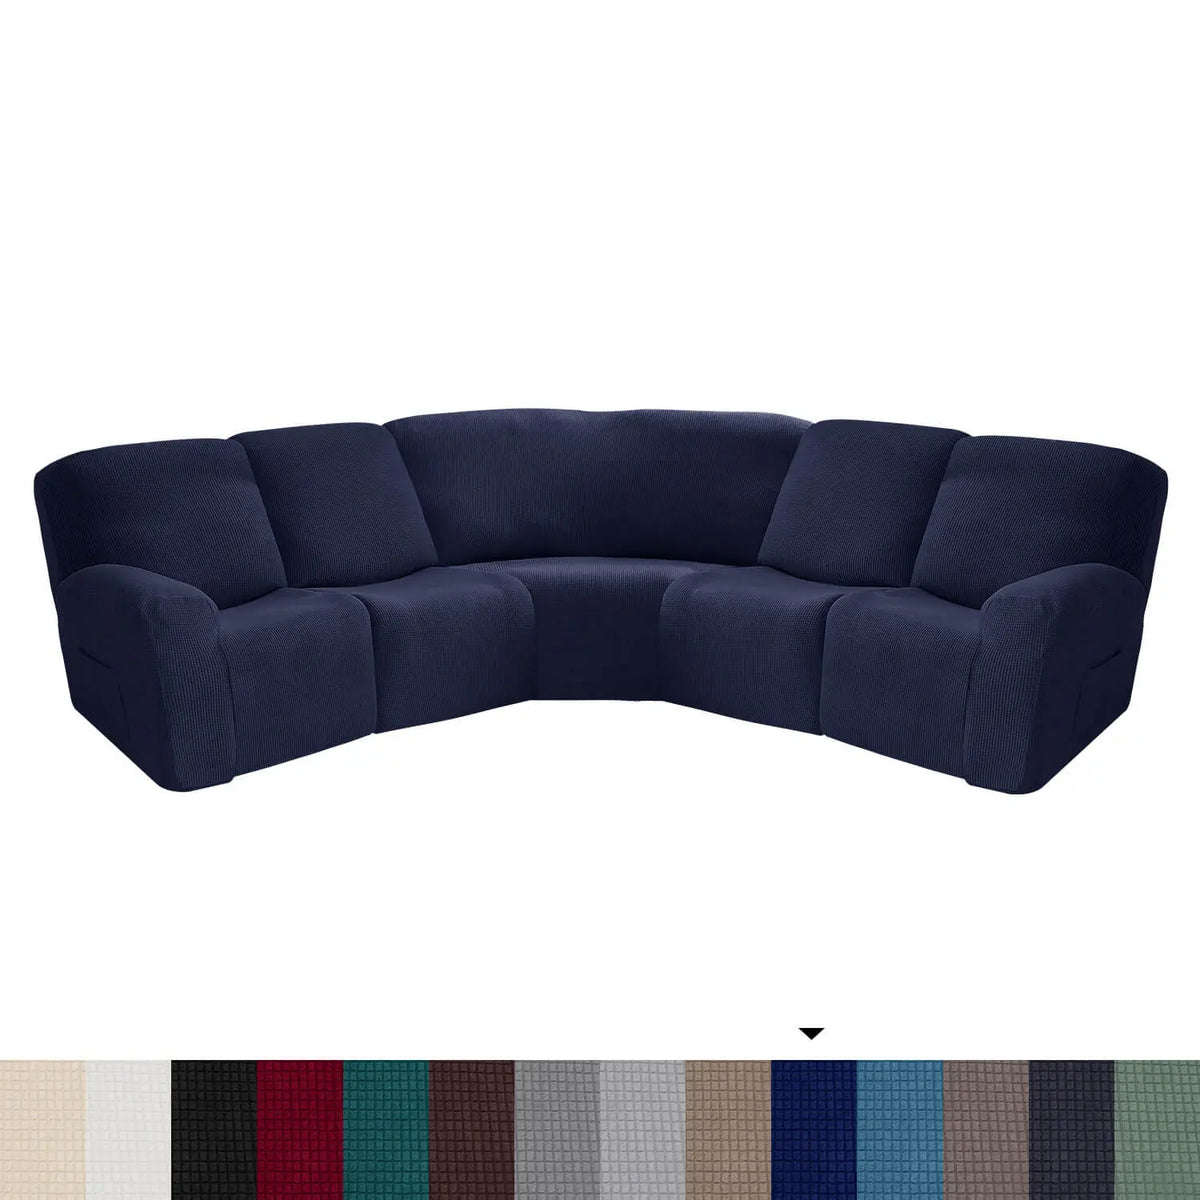 Crfatop L Shape Sectional Recliner Sofa Covers Corner Couch Covers Dark-Blue